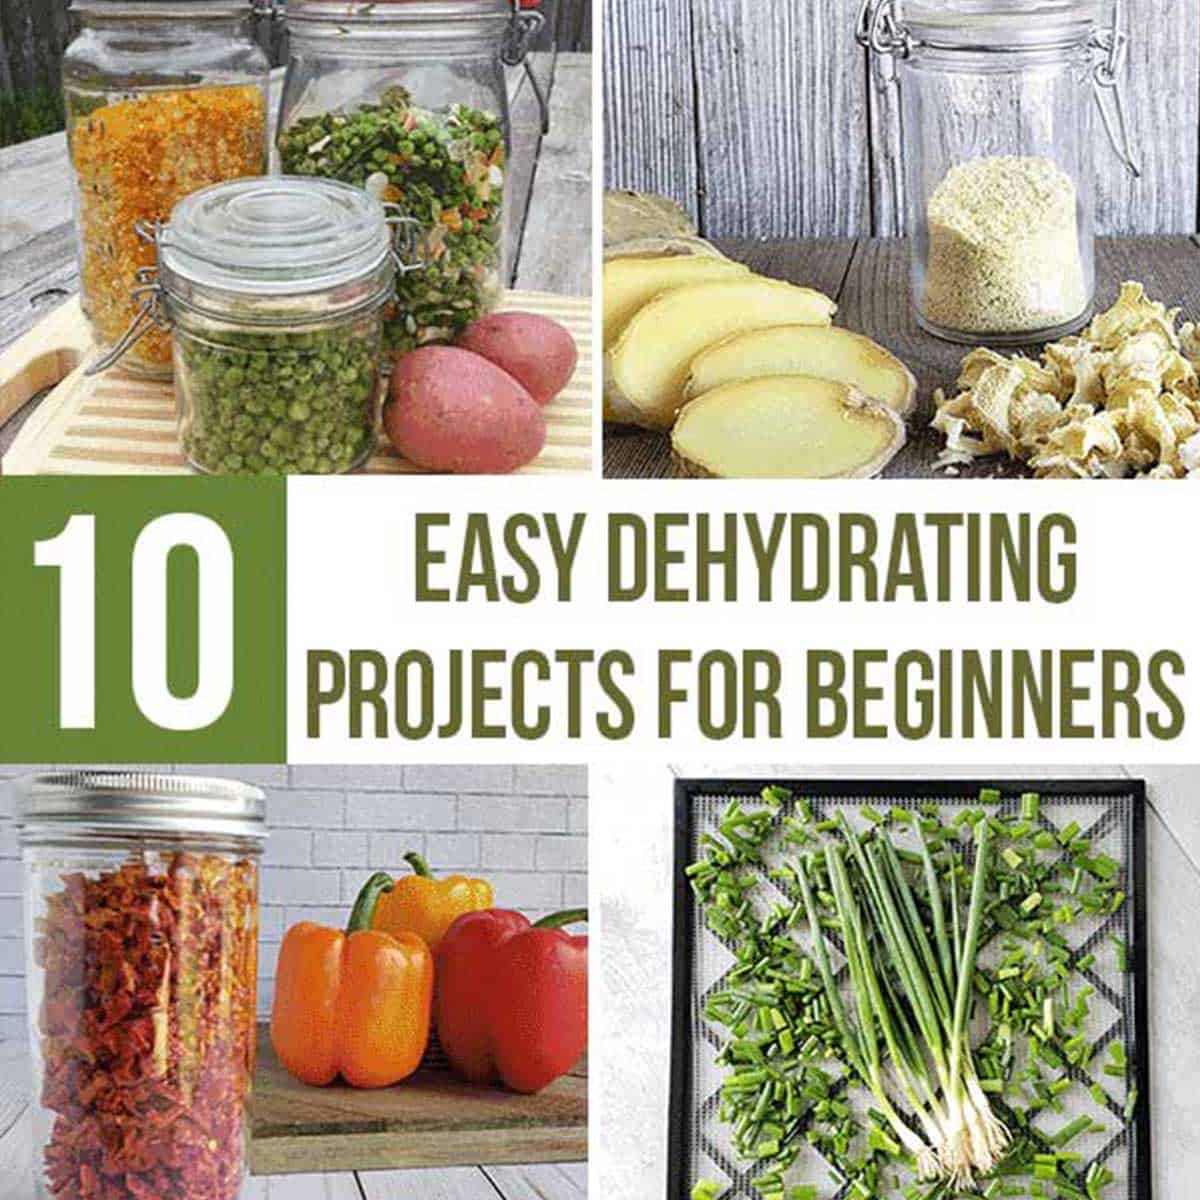 10 Easy Dehydrating Projects for Beginners